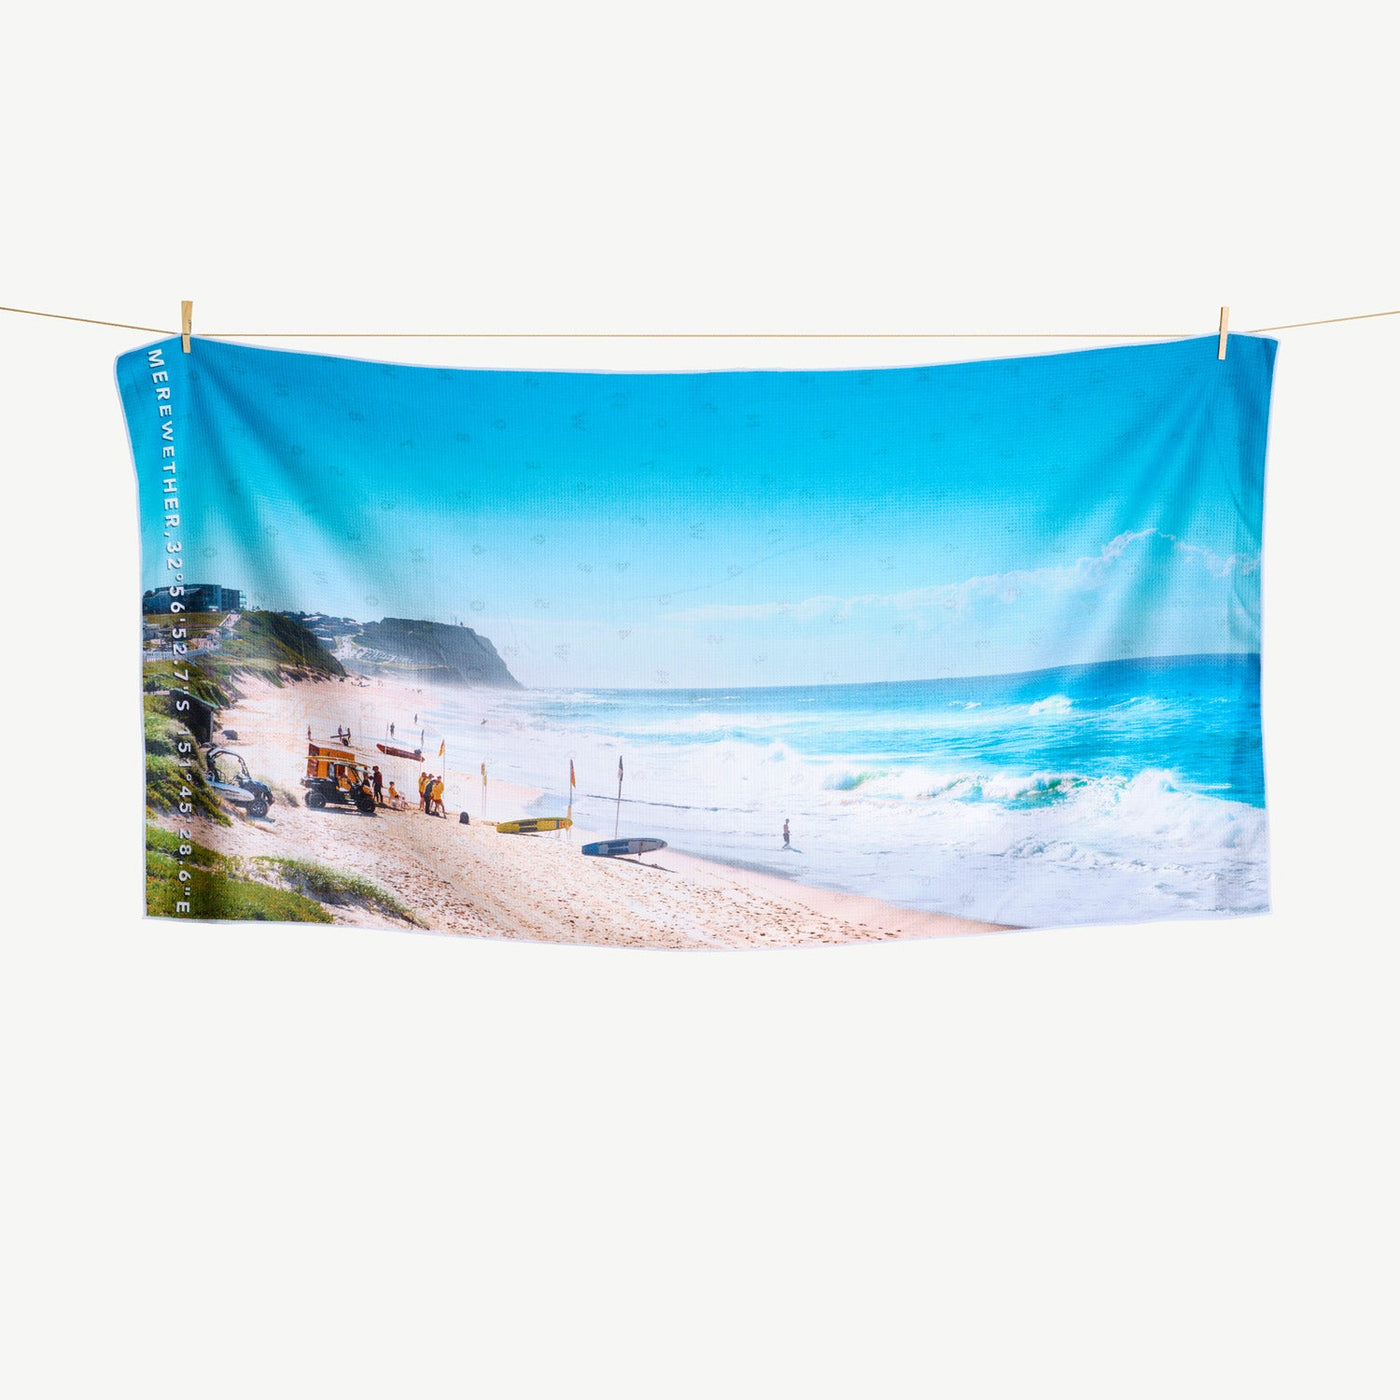 Merewether Weekend Beach Towel by Destination Label - sand free beach towel made from recycled plastic bottles.